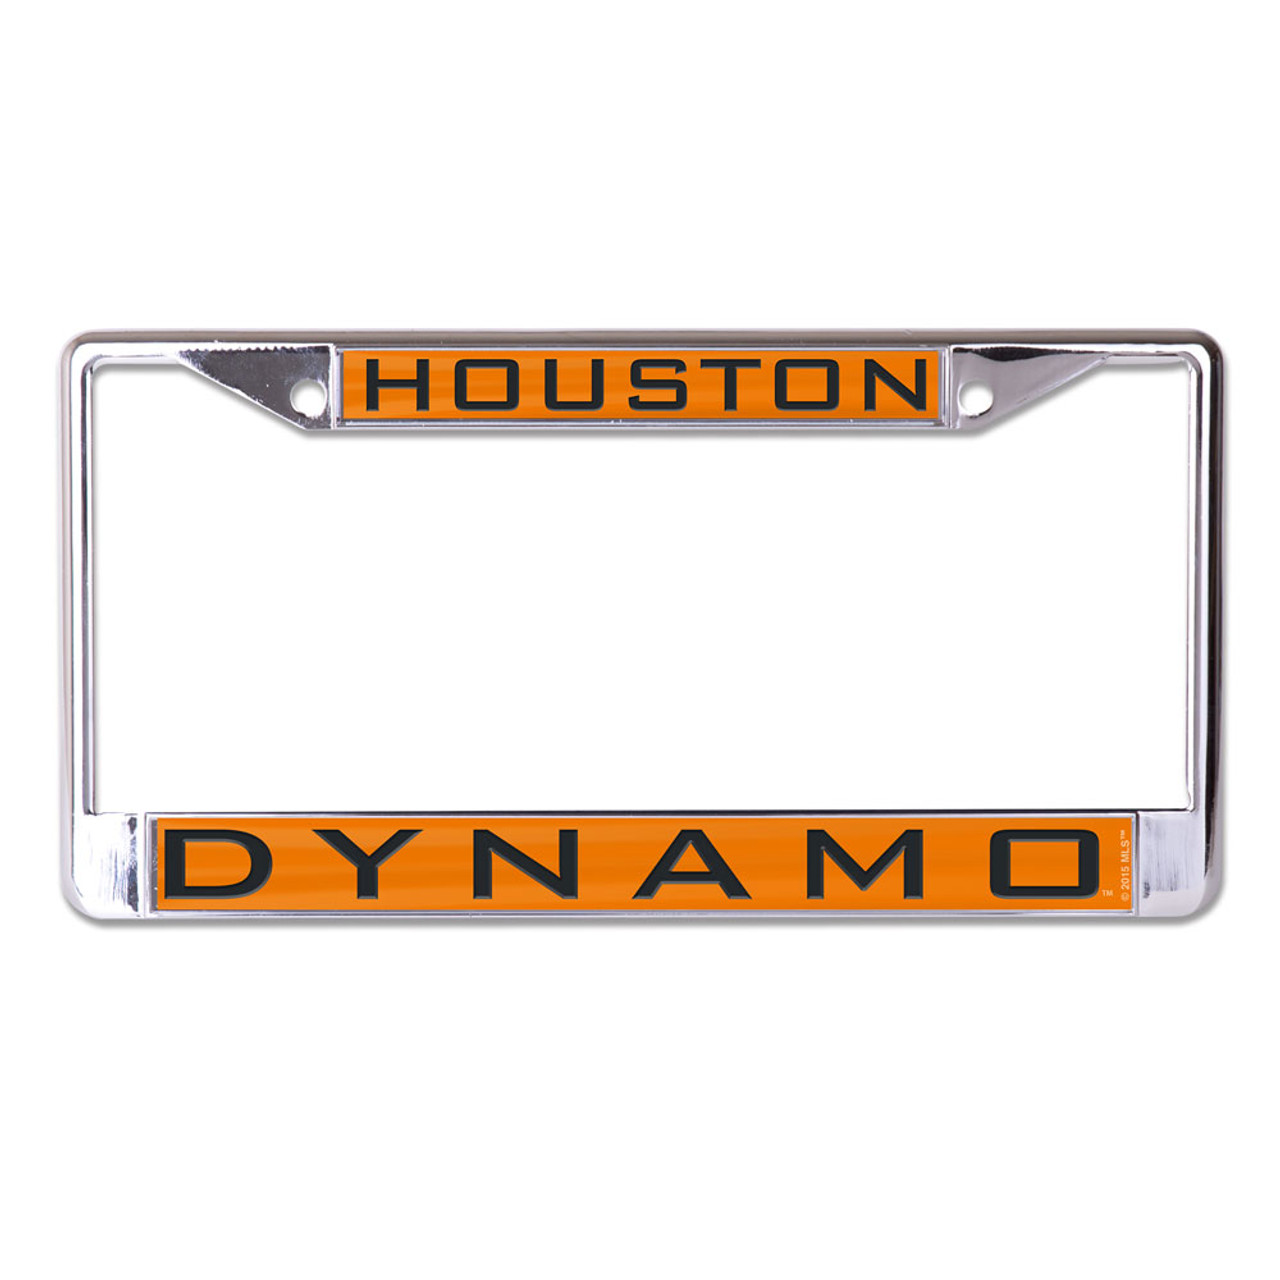 Win-Craft,Inc-McArthur Houston Dynamo License Plate Frame - Inlaid - Special Order